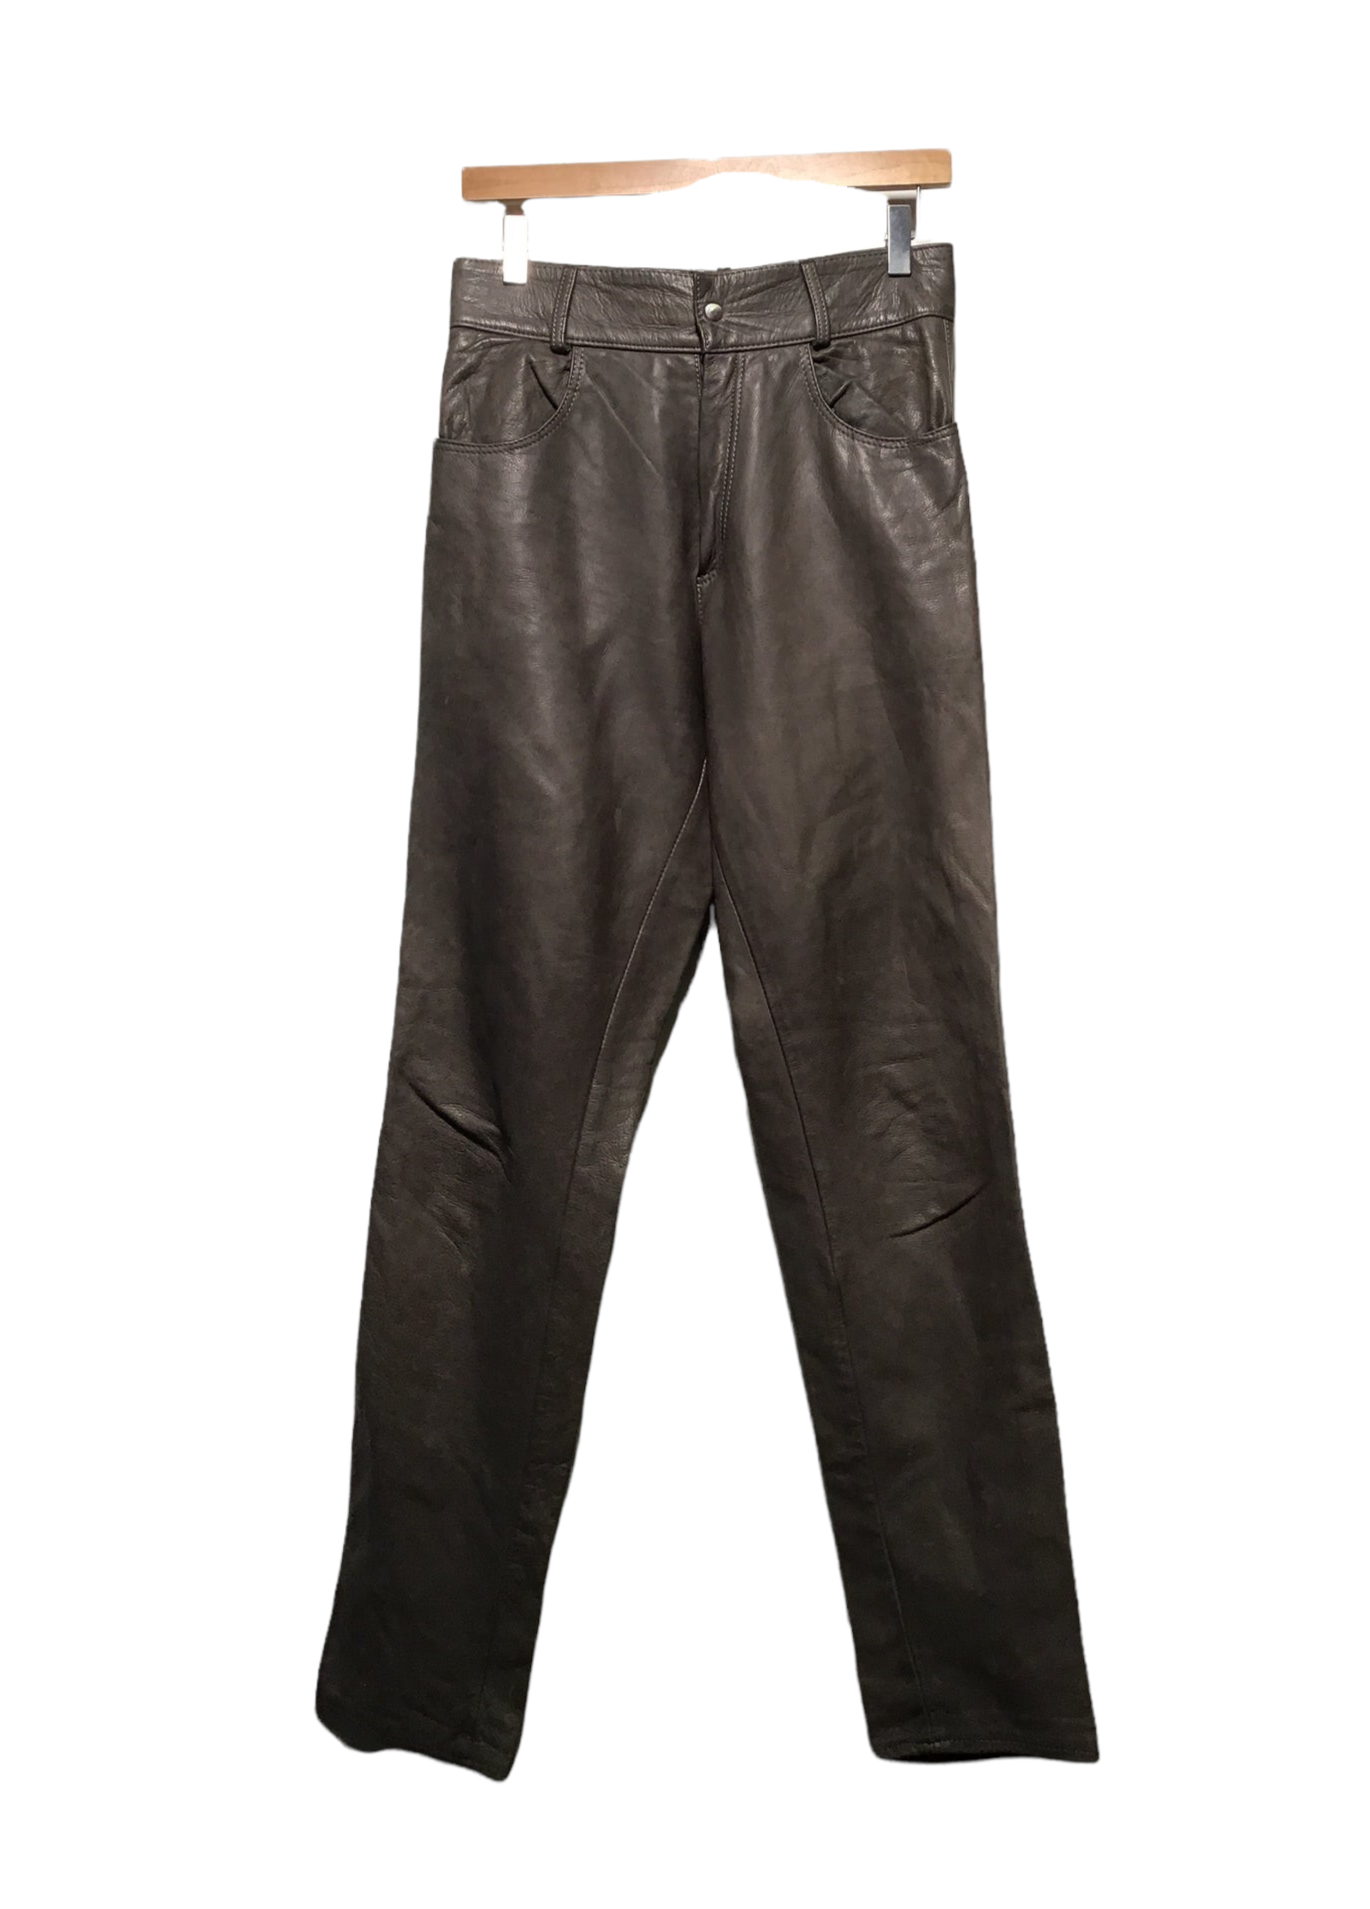 Women’s Leather Trousers (Size S)